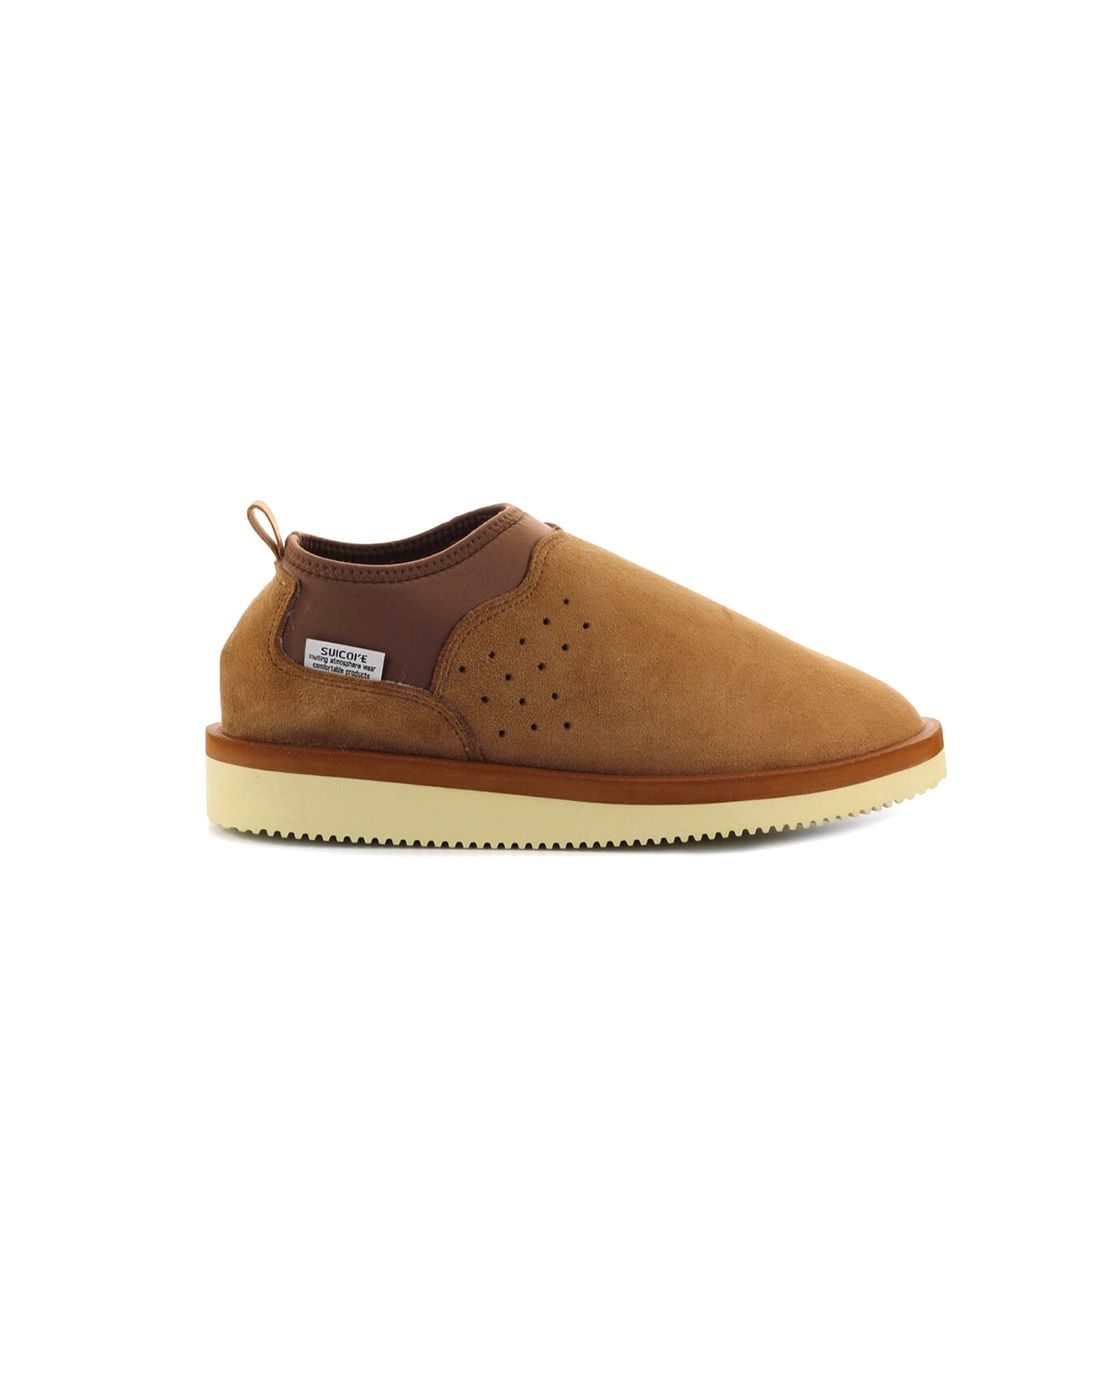 Shoes for woman SUICOKE OG 073 M2AB MID BROWN